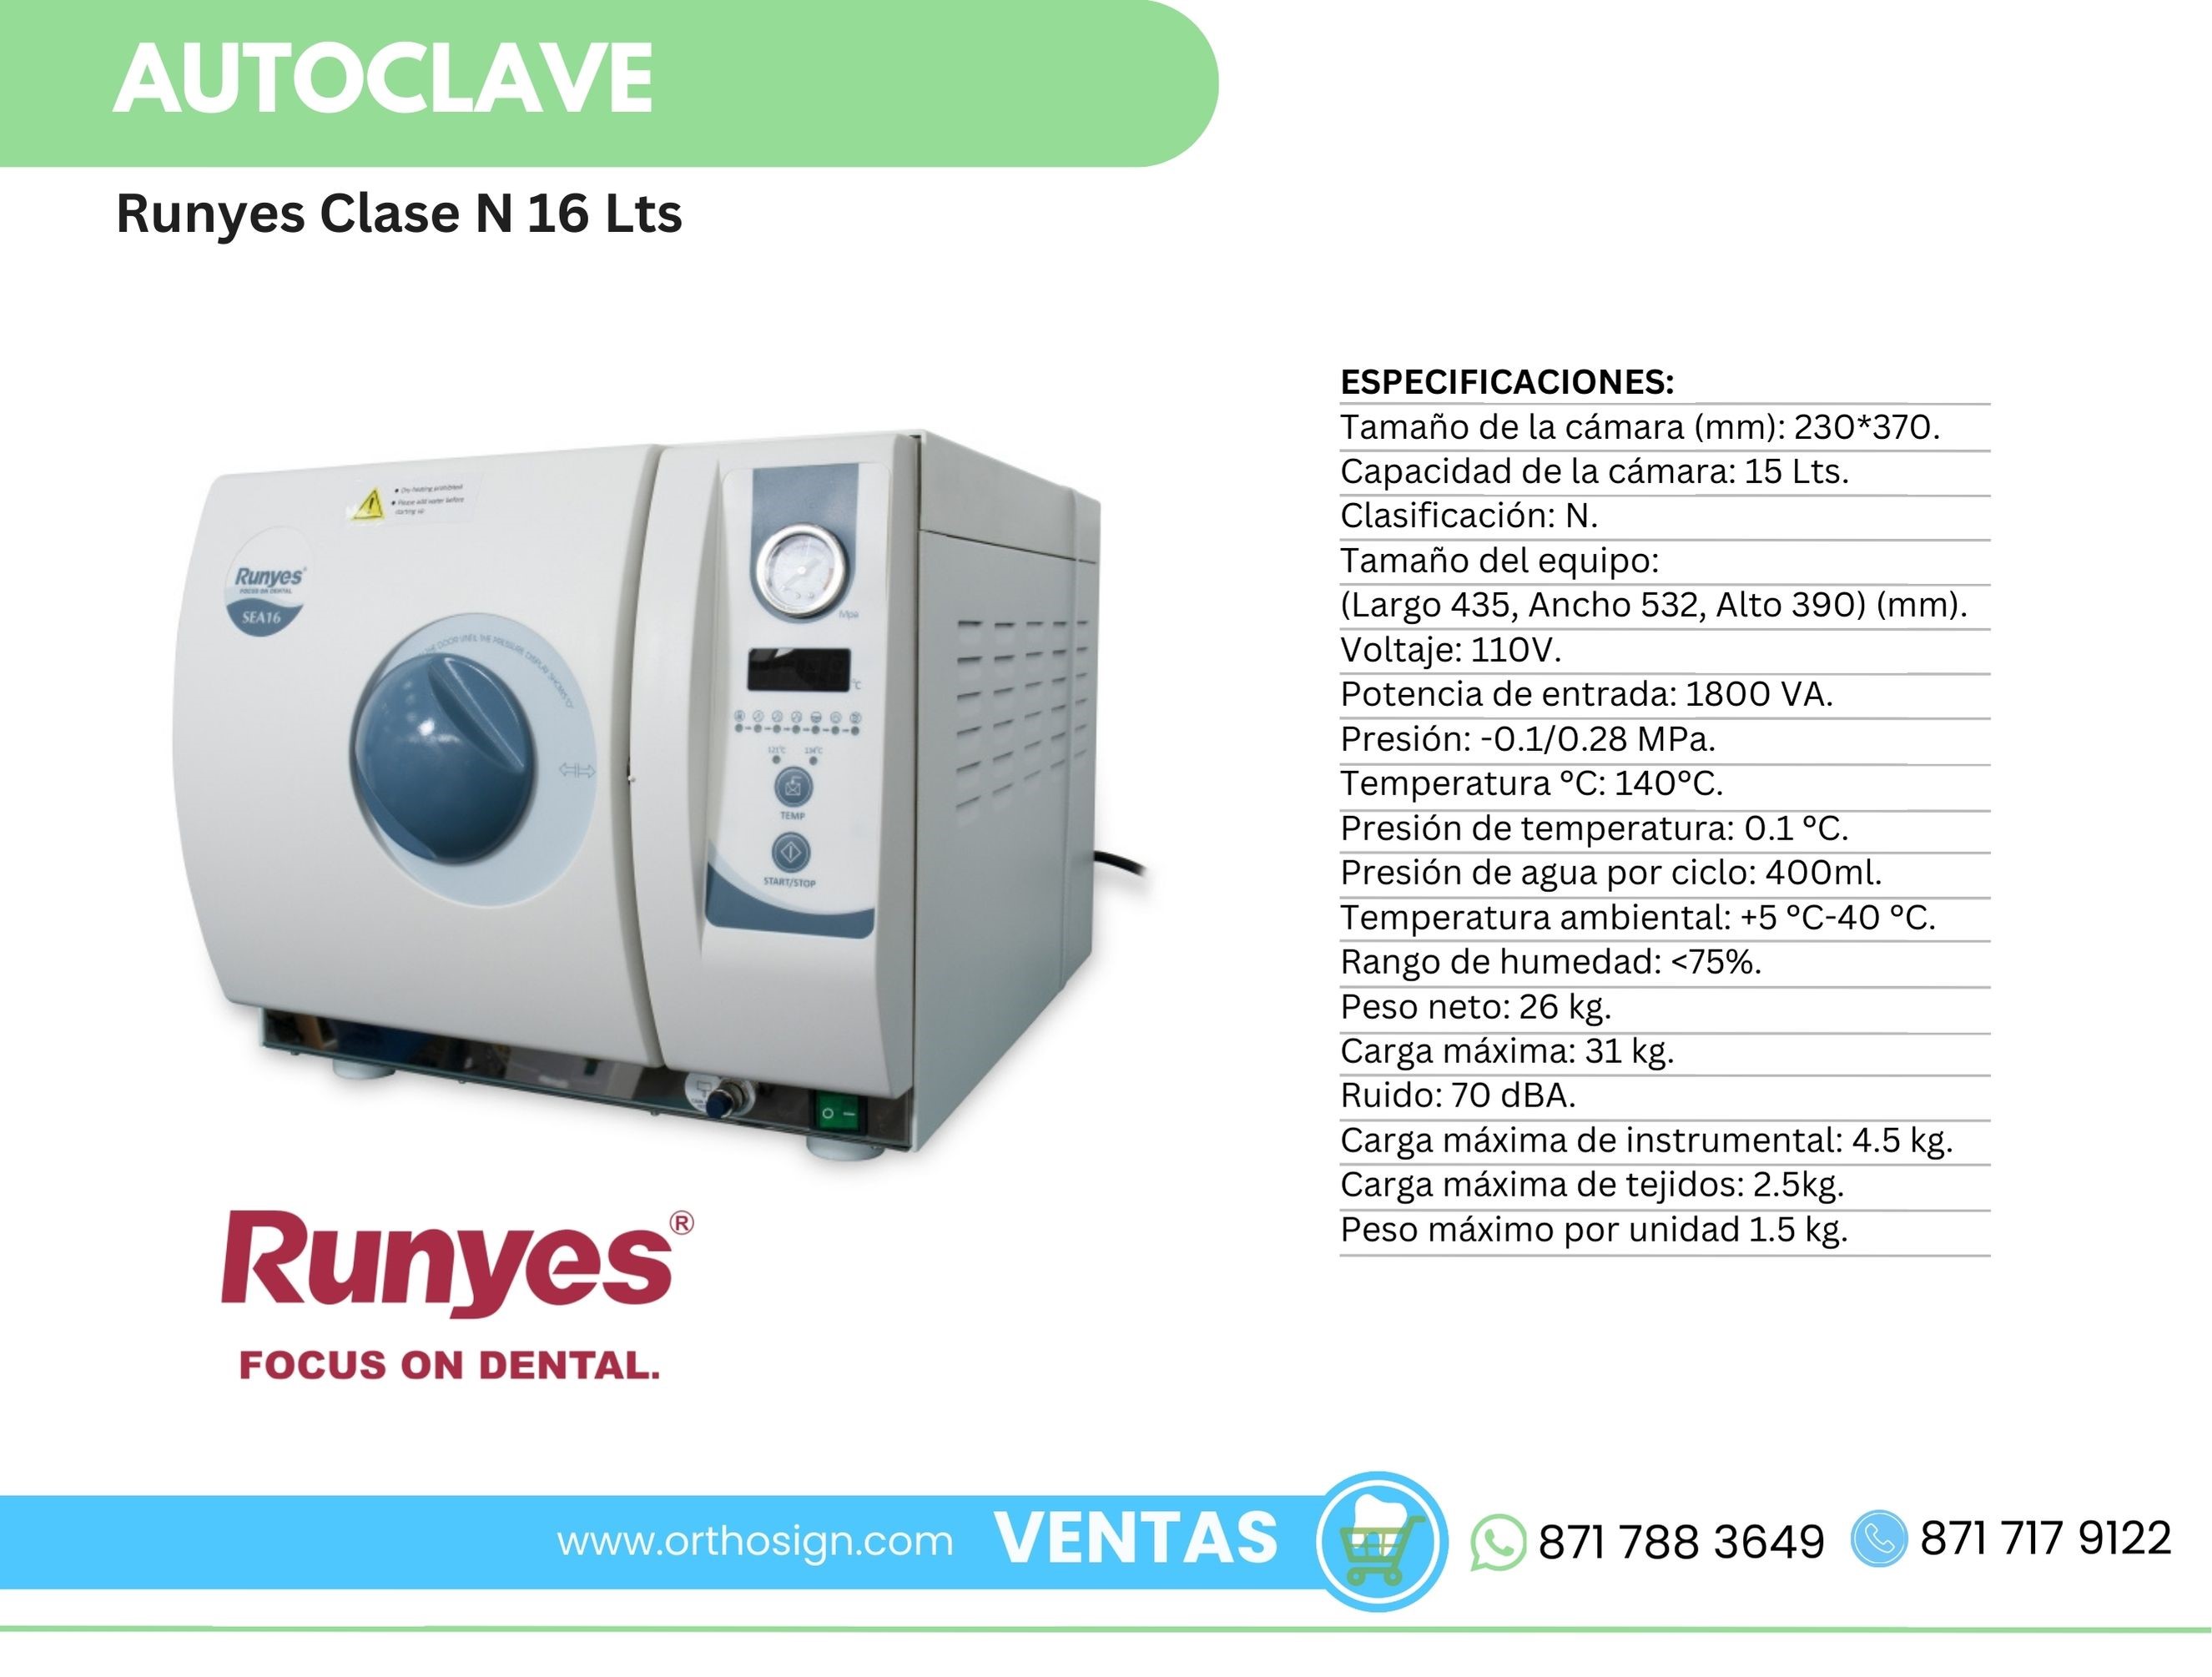 Autoclave Runyes Clase N 16 Lts Orthosign